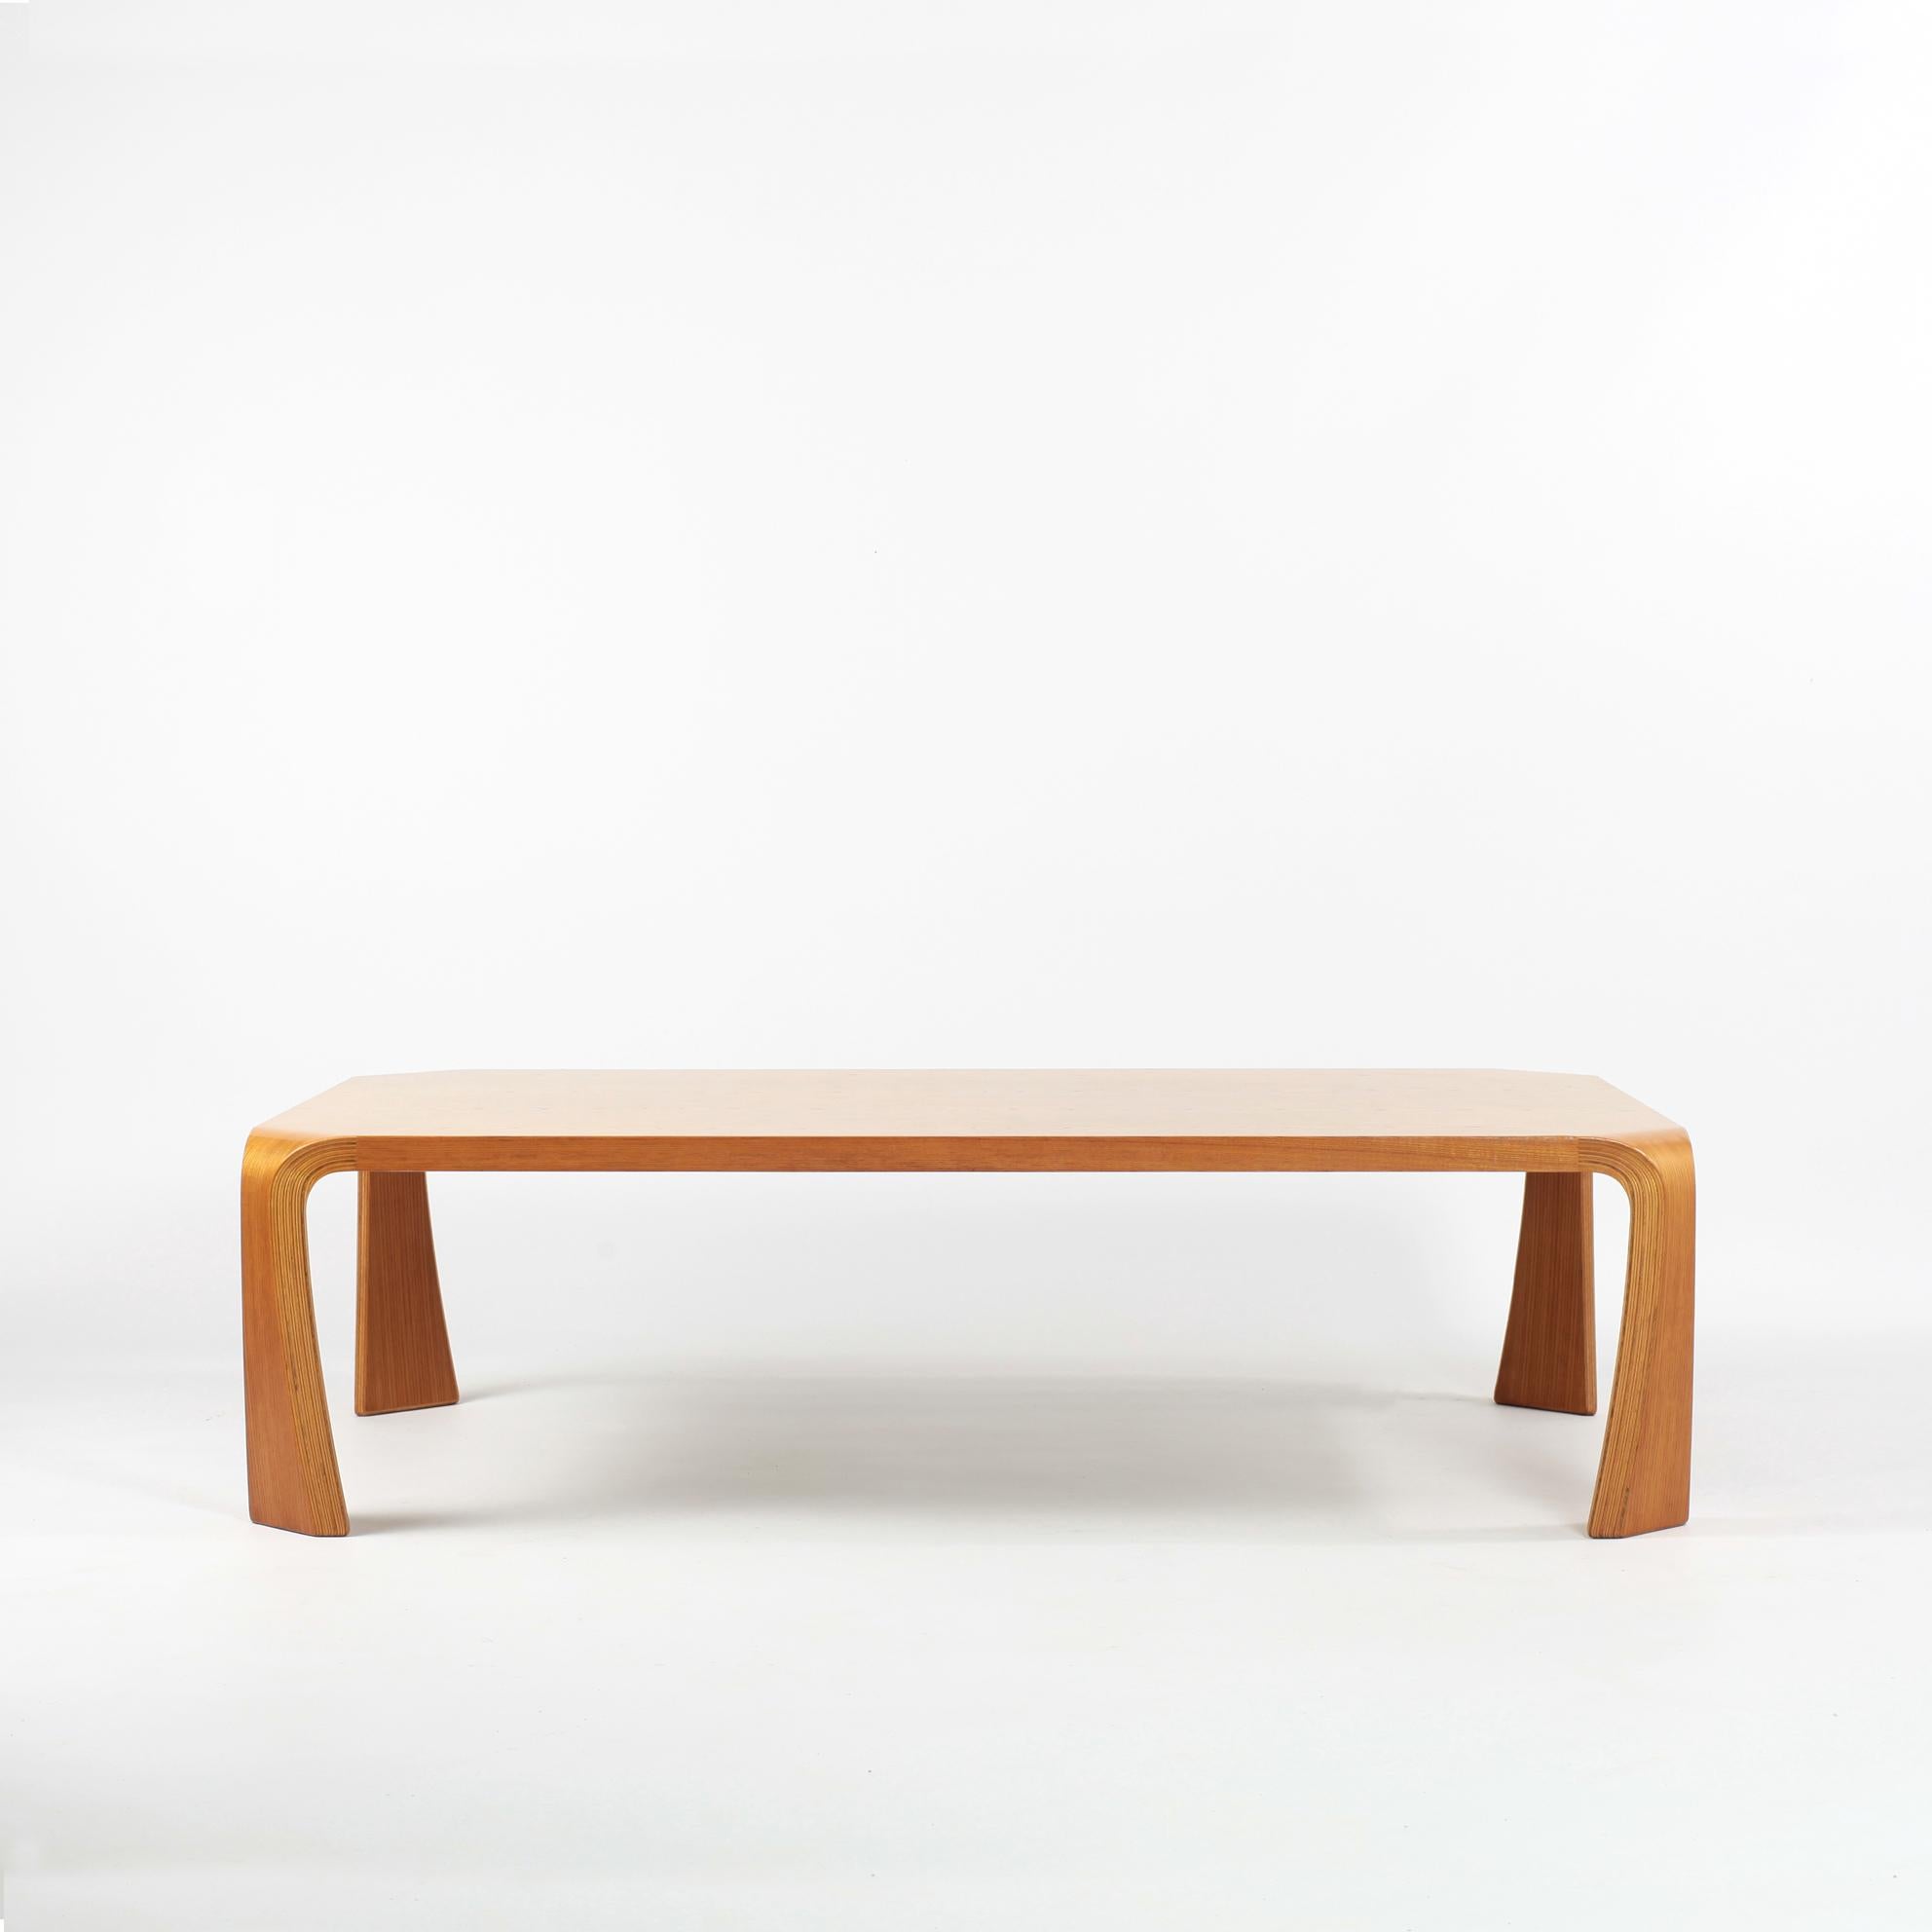 Stunning Mid-Century Modern coffee table by Saburo Inui for Tendo Mokko from Japan 1960s.
Laminated, curved and richly grained wood.
This low table is particularly stylish and catches the eye thanks to the unique curved design of the legs.
The